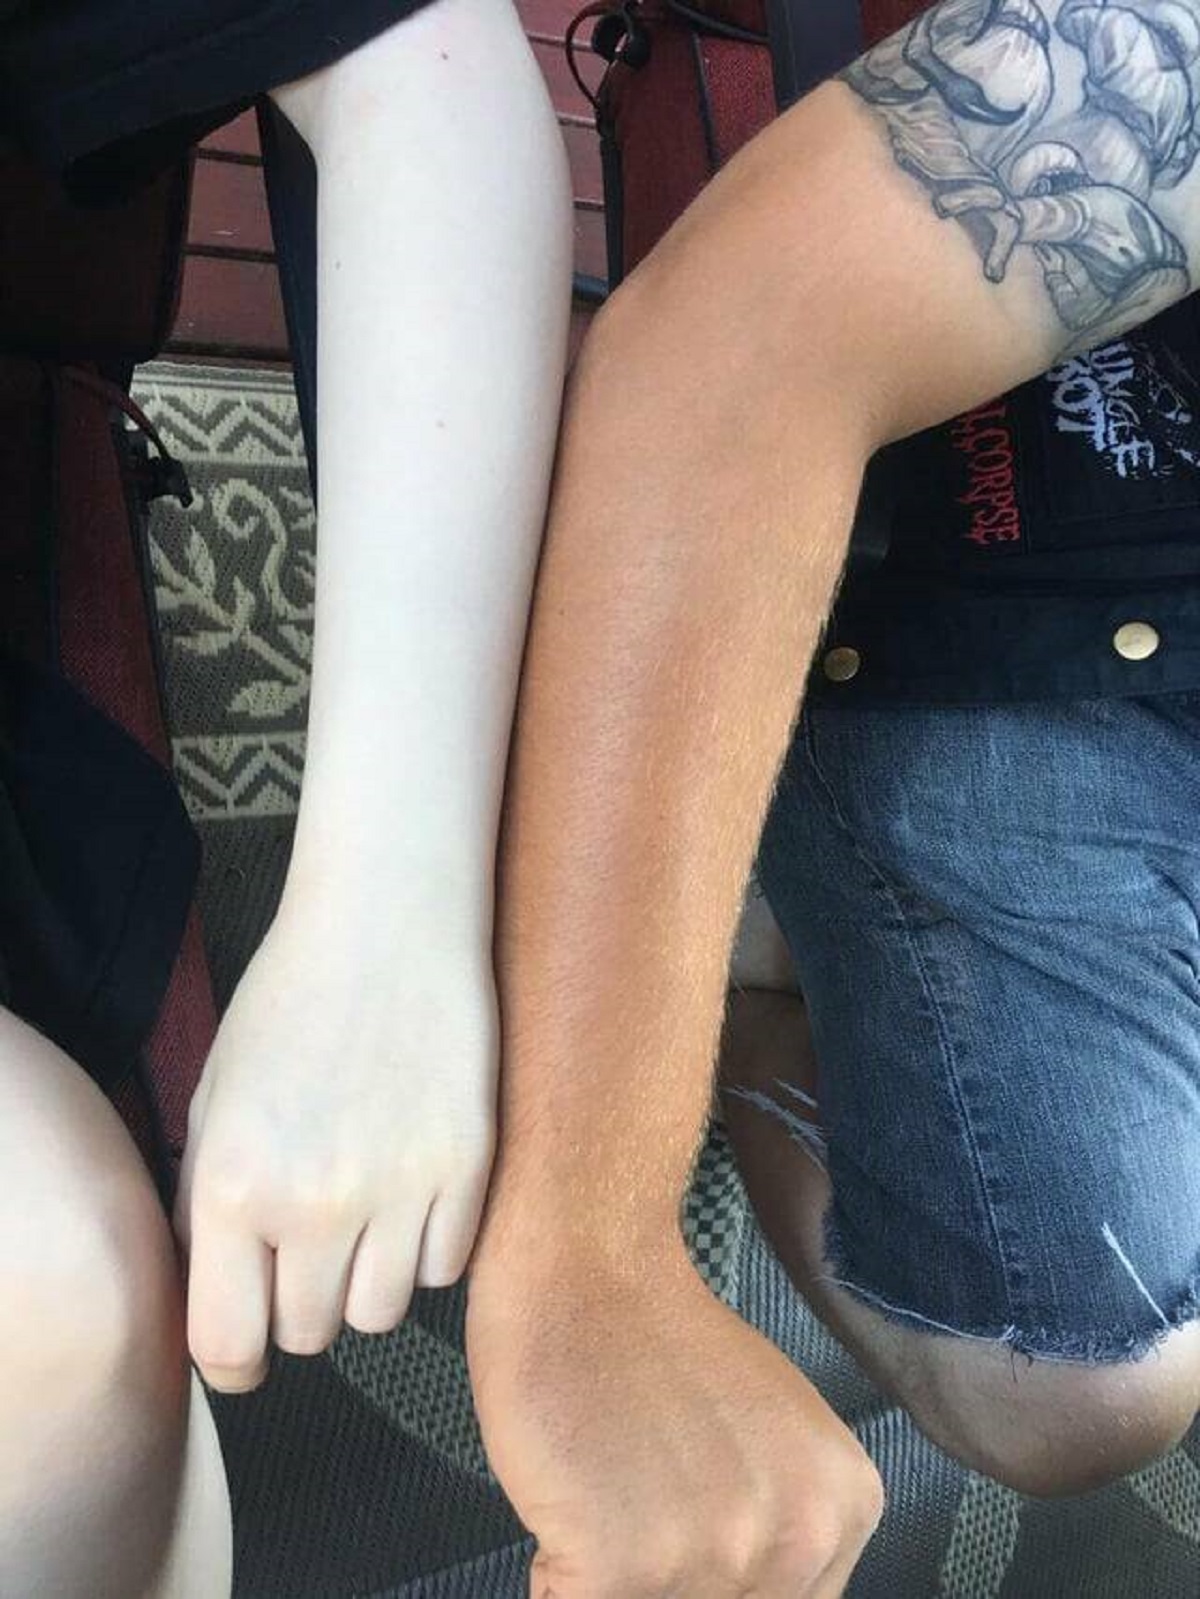 "The difference between my brother and I’s tan"